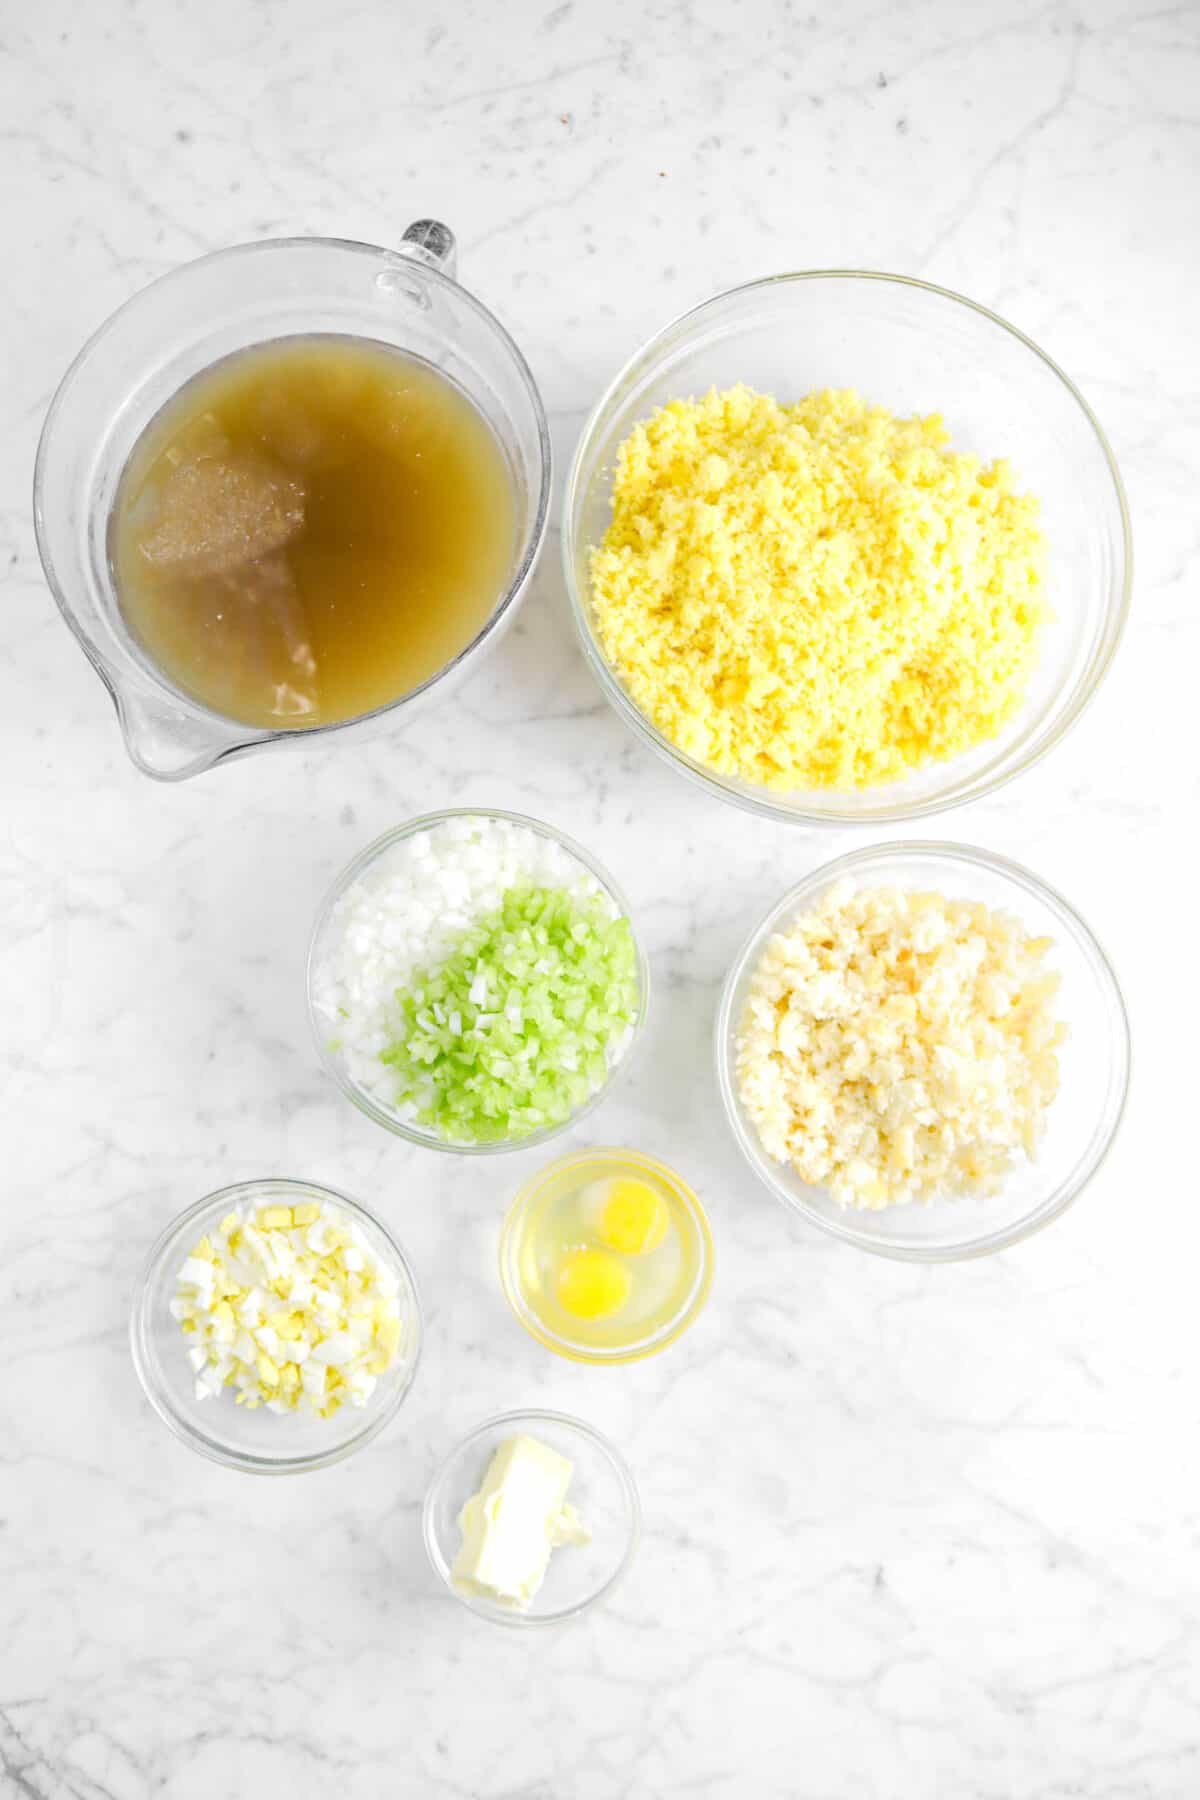 chicken stock, cornbread crumbles, onion, celery, chopped biscuits, two eggs, chopped boiled egg, and butter in glass bowls